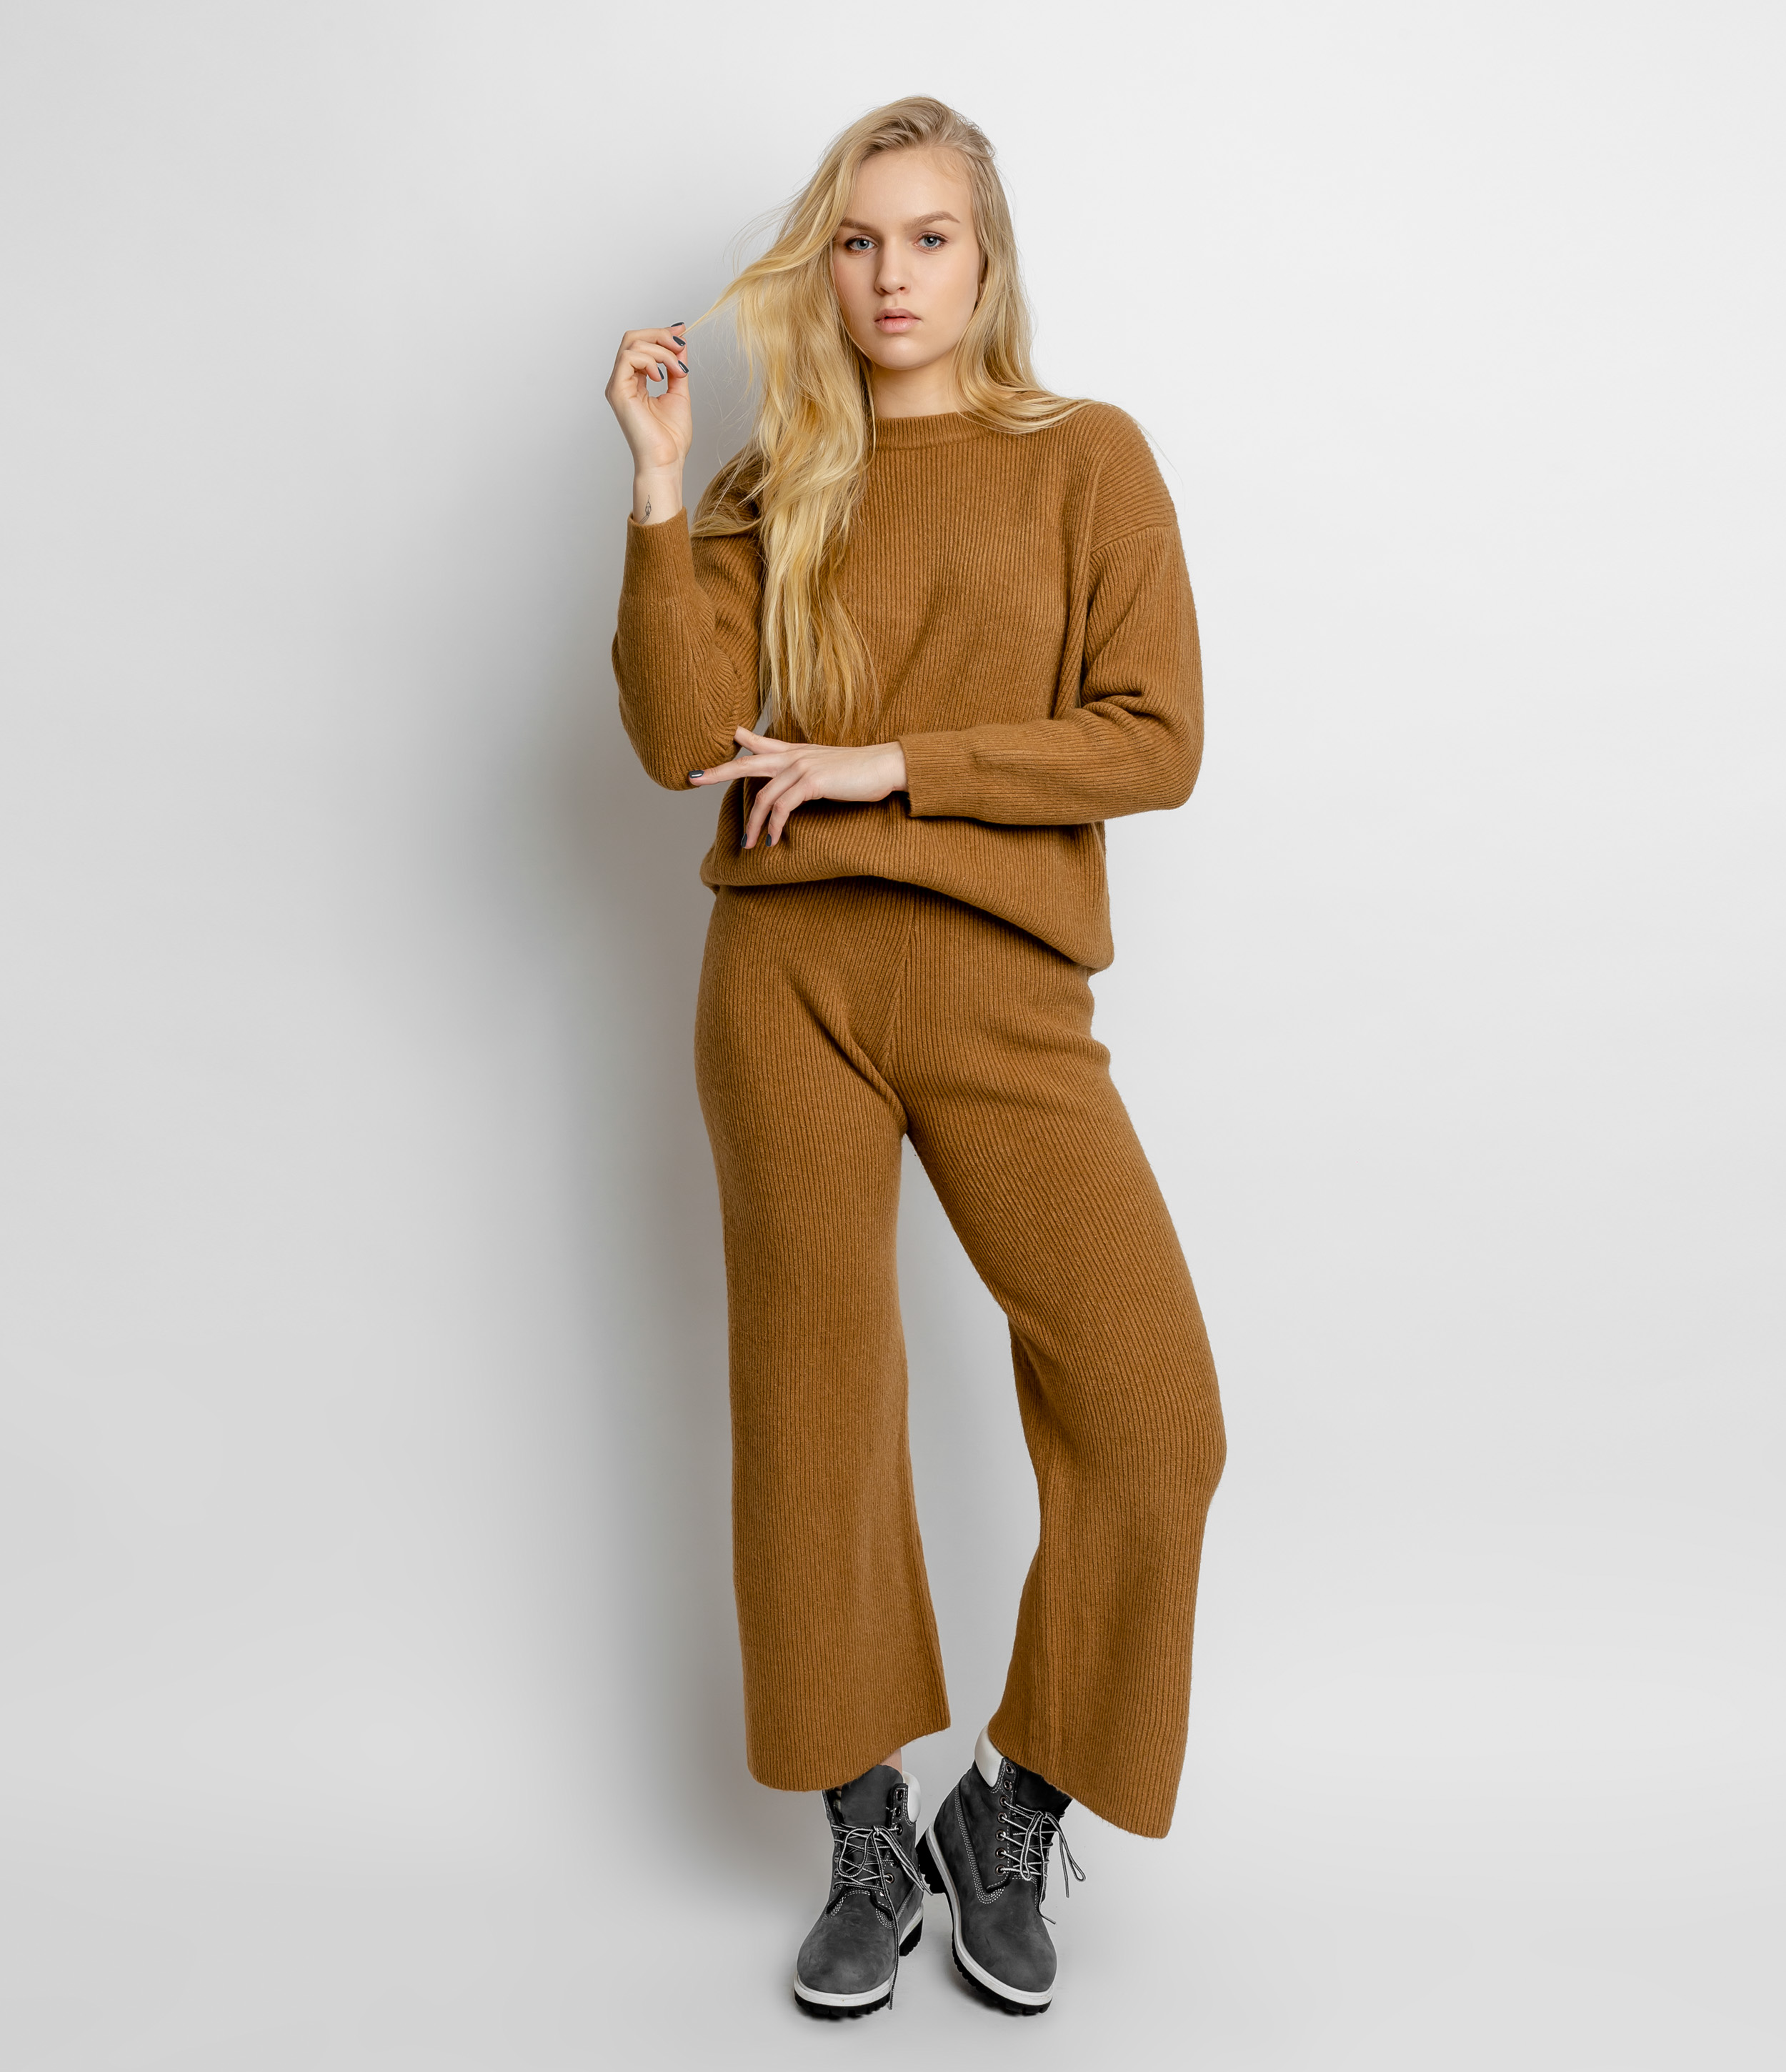 Women's wool knitted suit